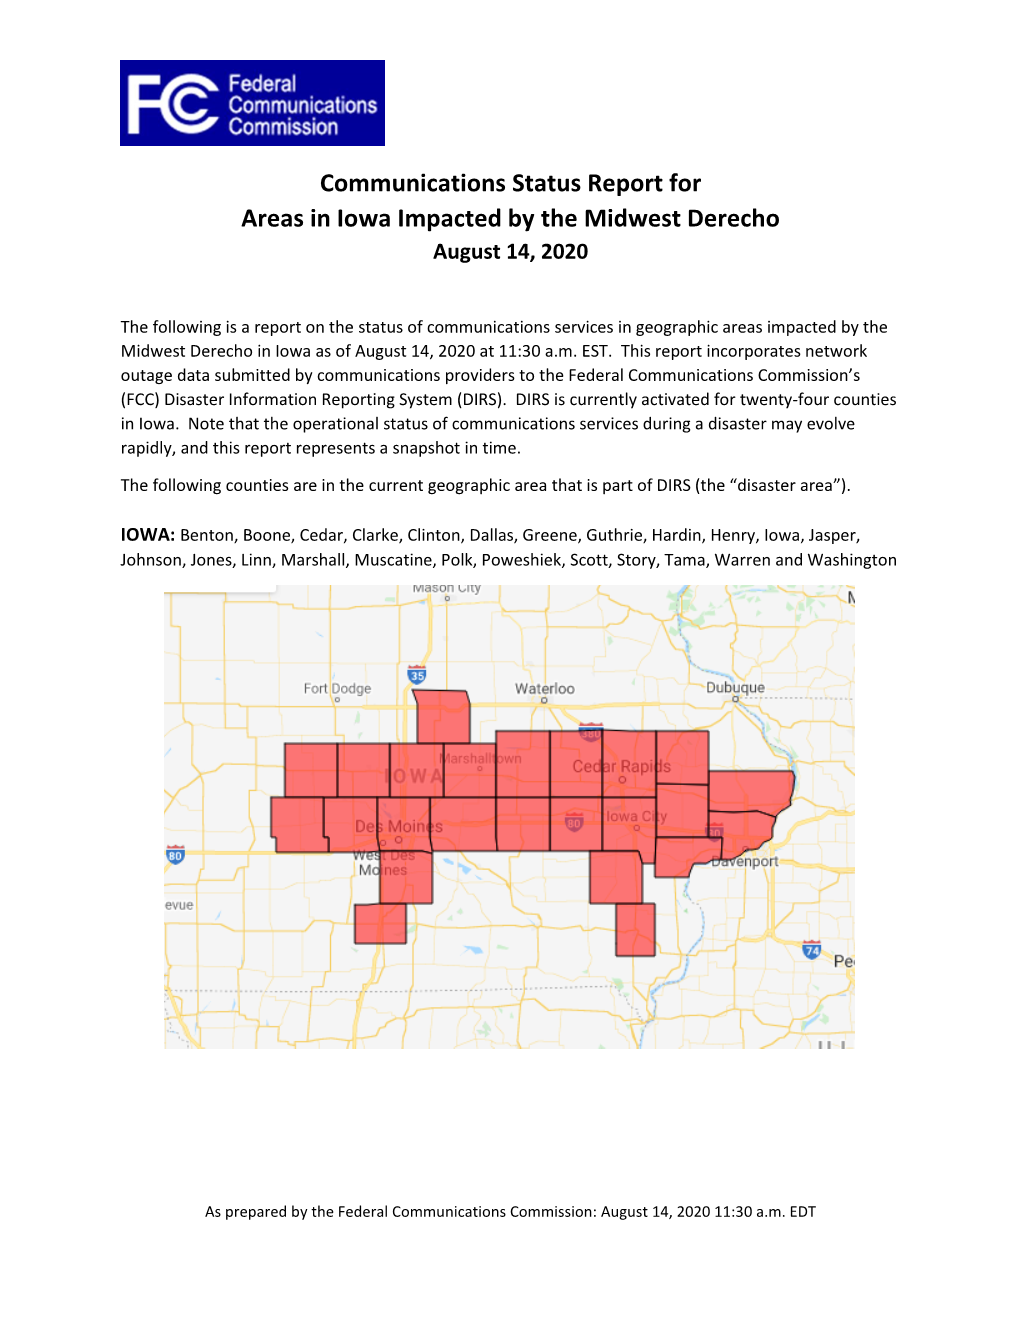 Communications Status Report for Areas in Iowa Impacted by the Midwest Derecho August 14, 2020